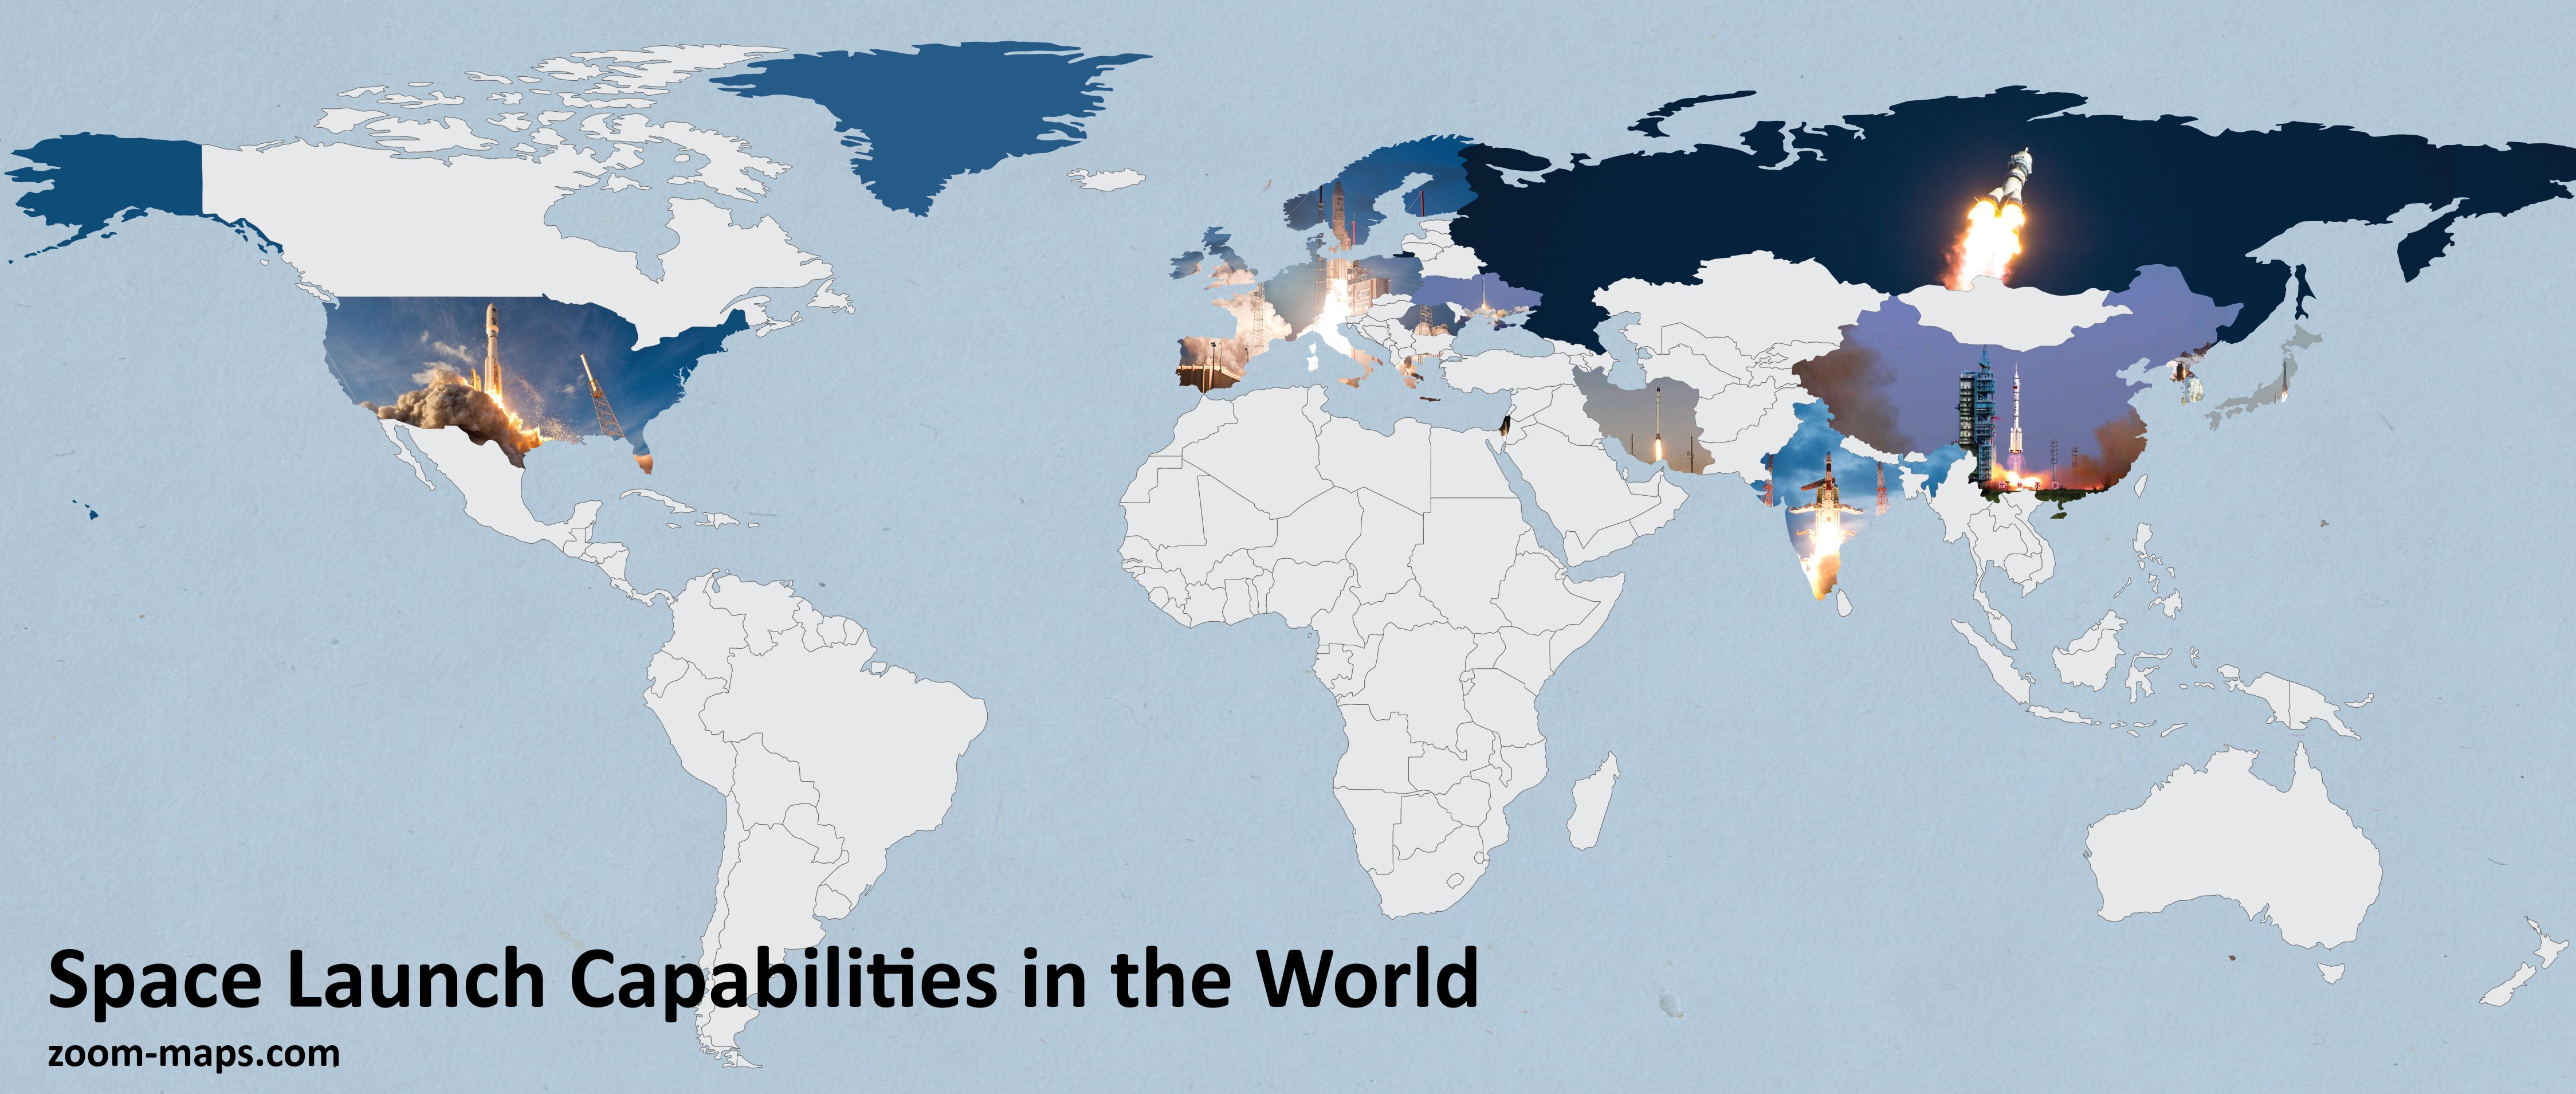 Space Launch Capabilities · Zoom Maps